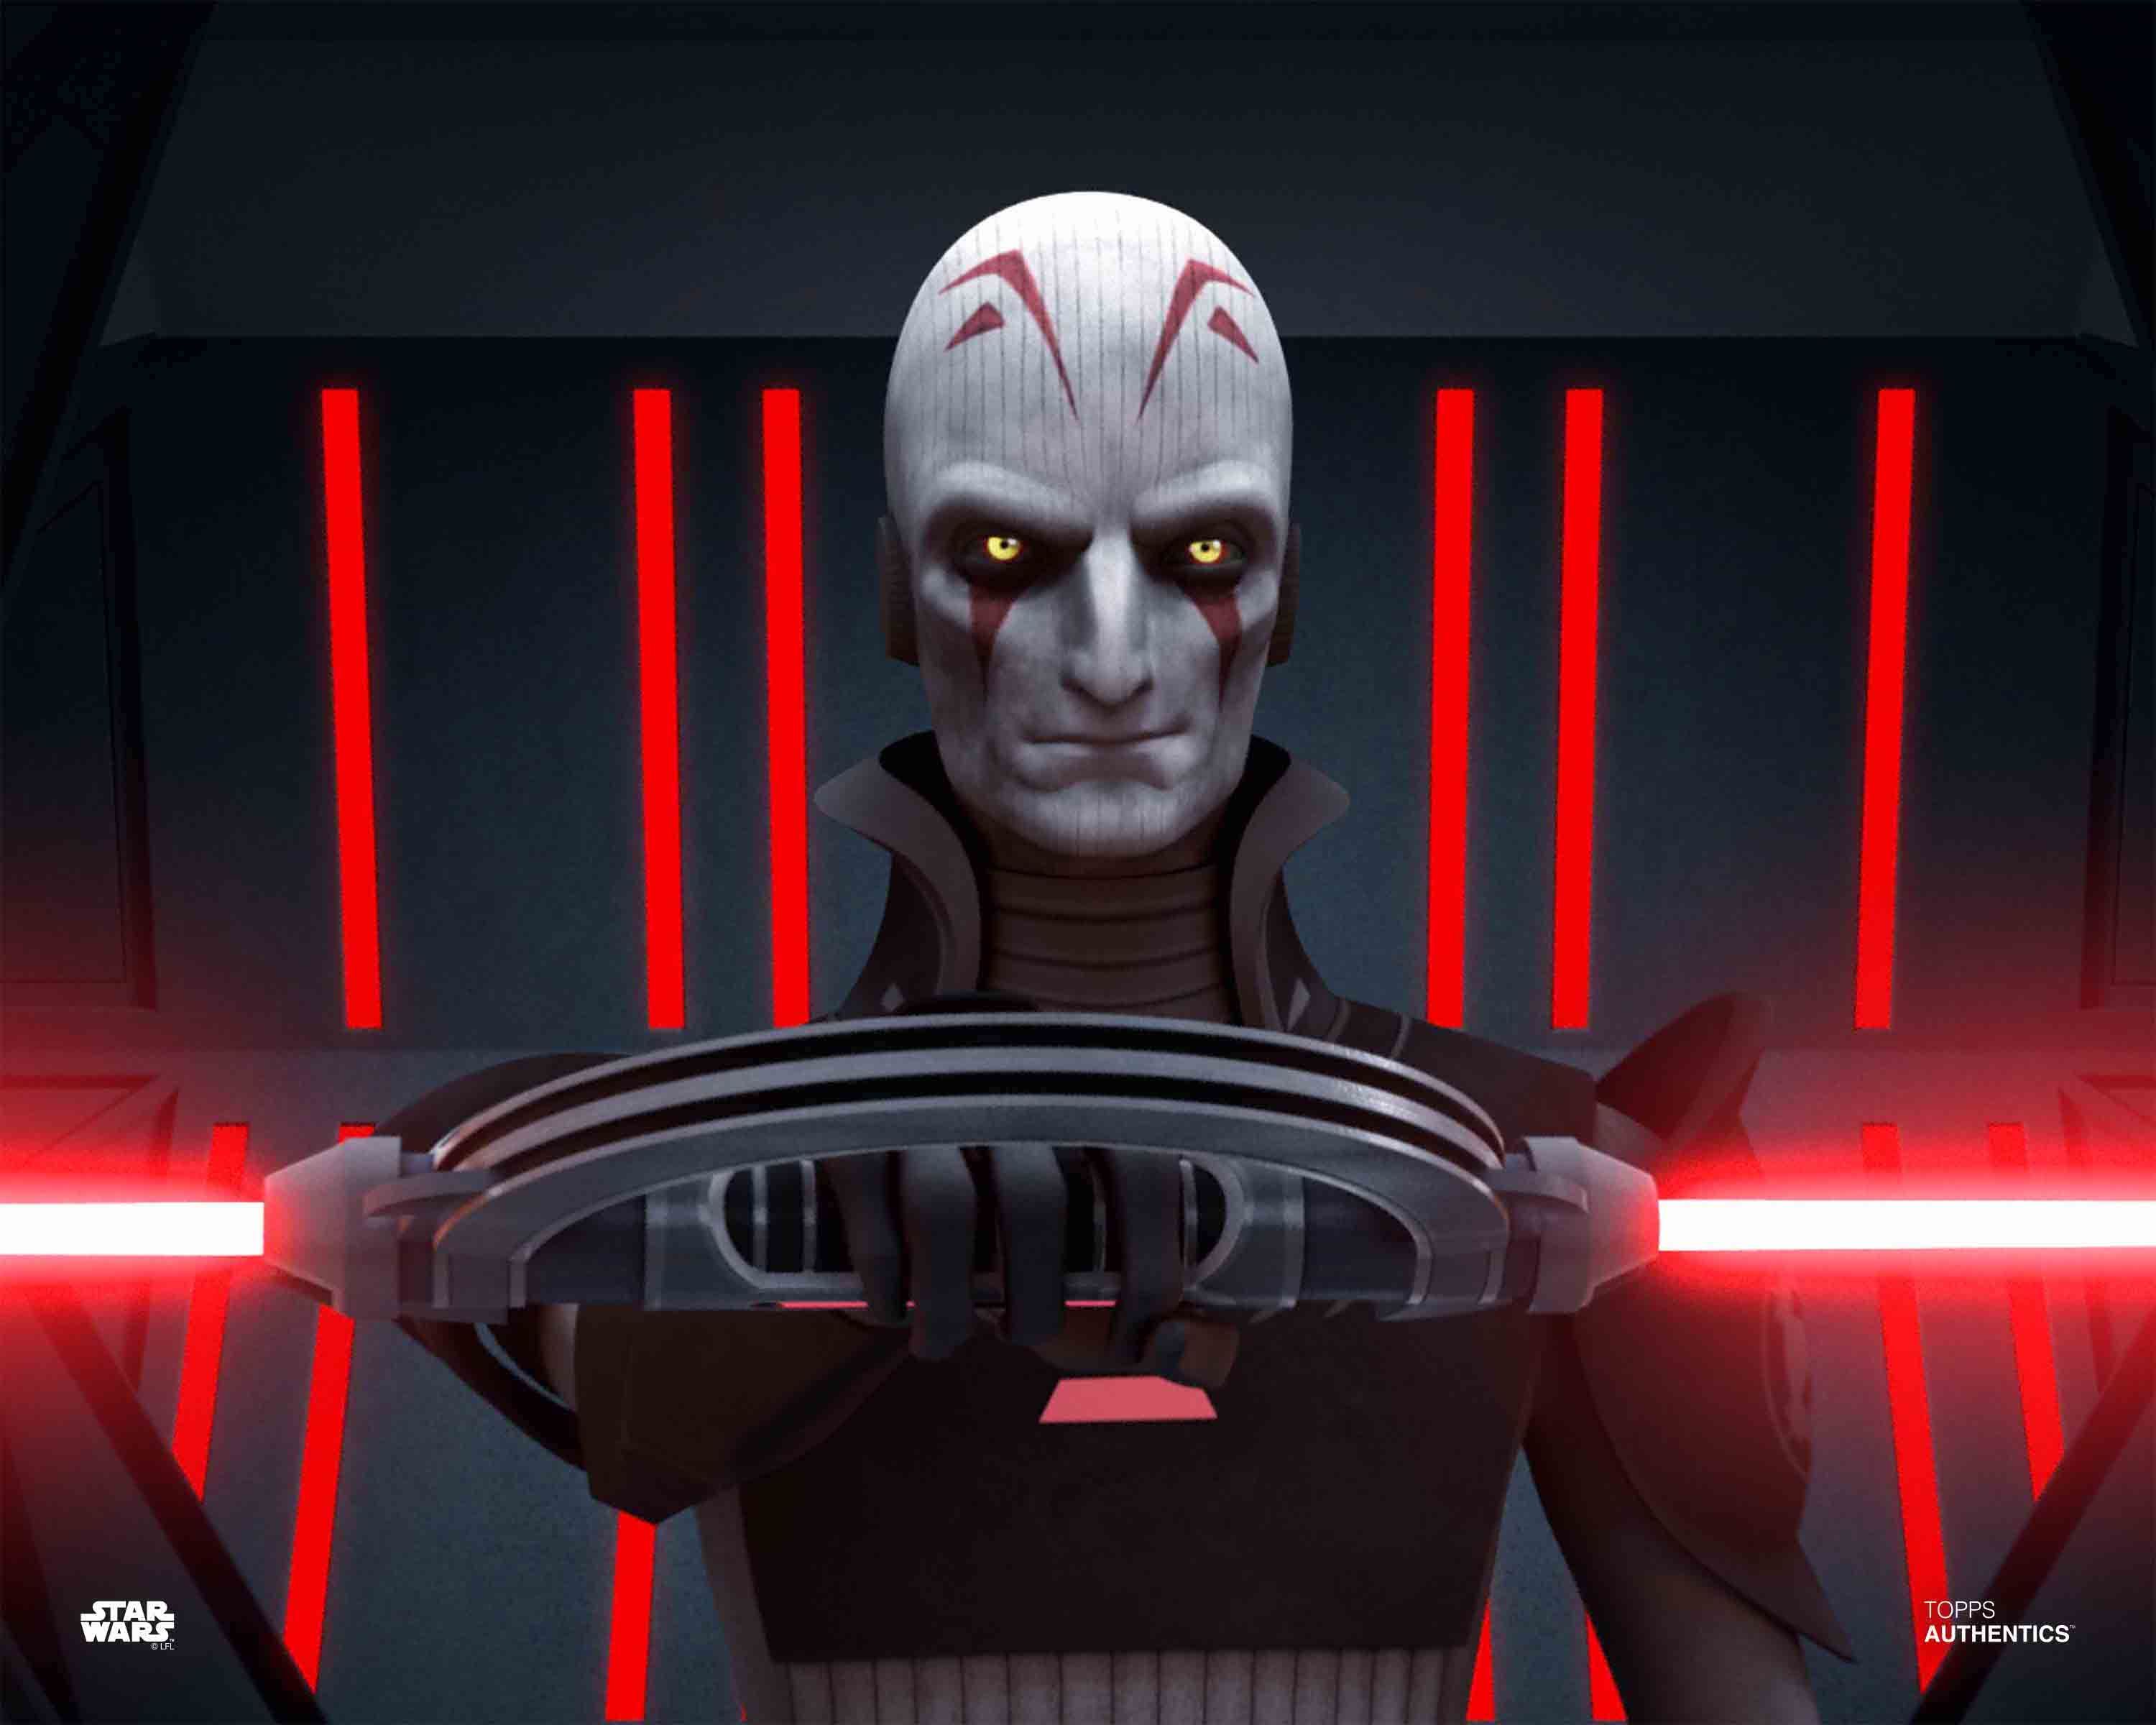 New 'Star Wars Rebels' Photo Added to the Star Wars Authentics Site With Kenobi